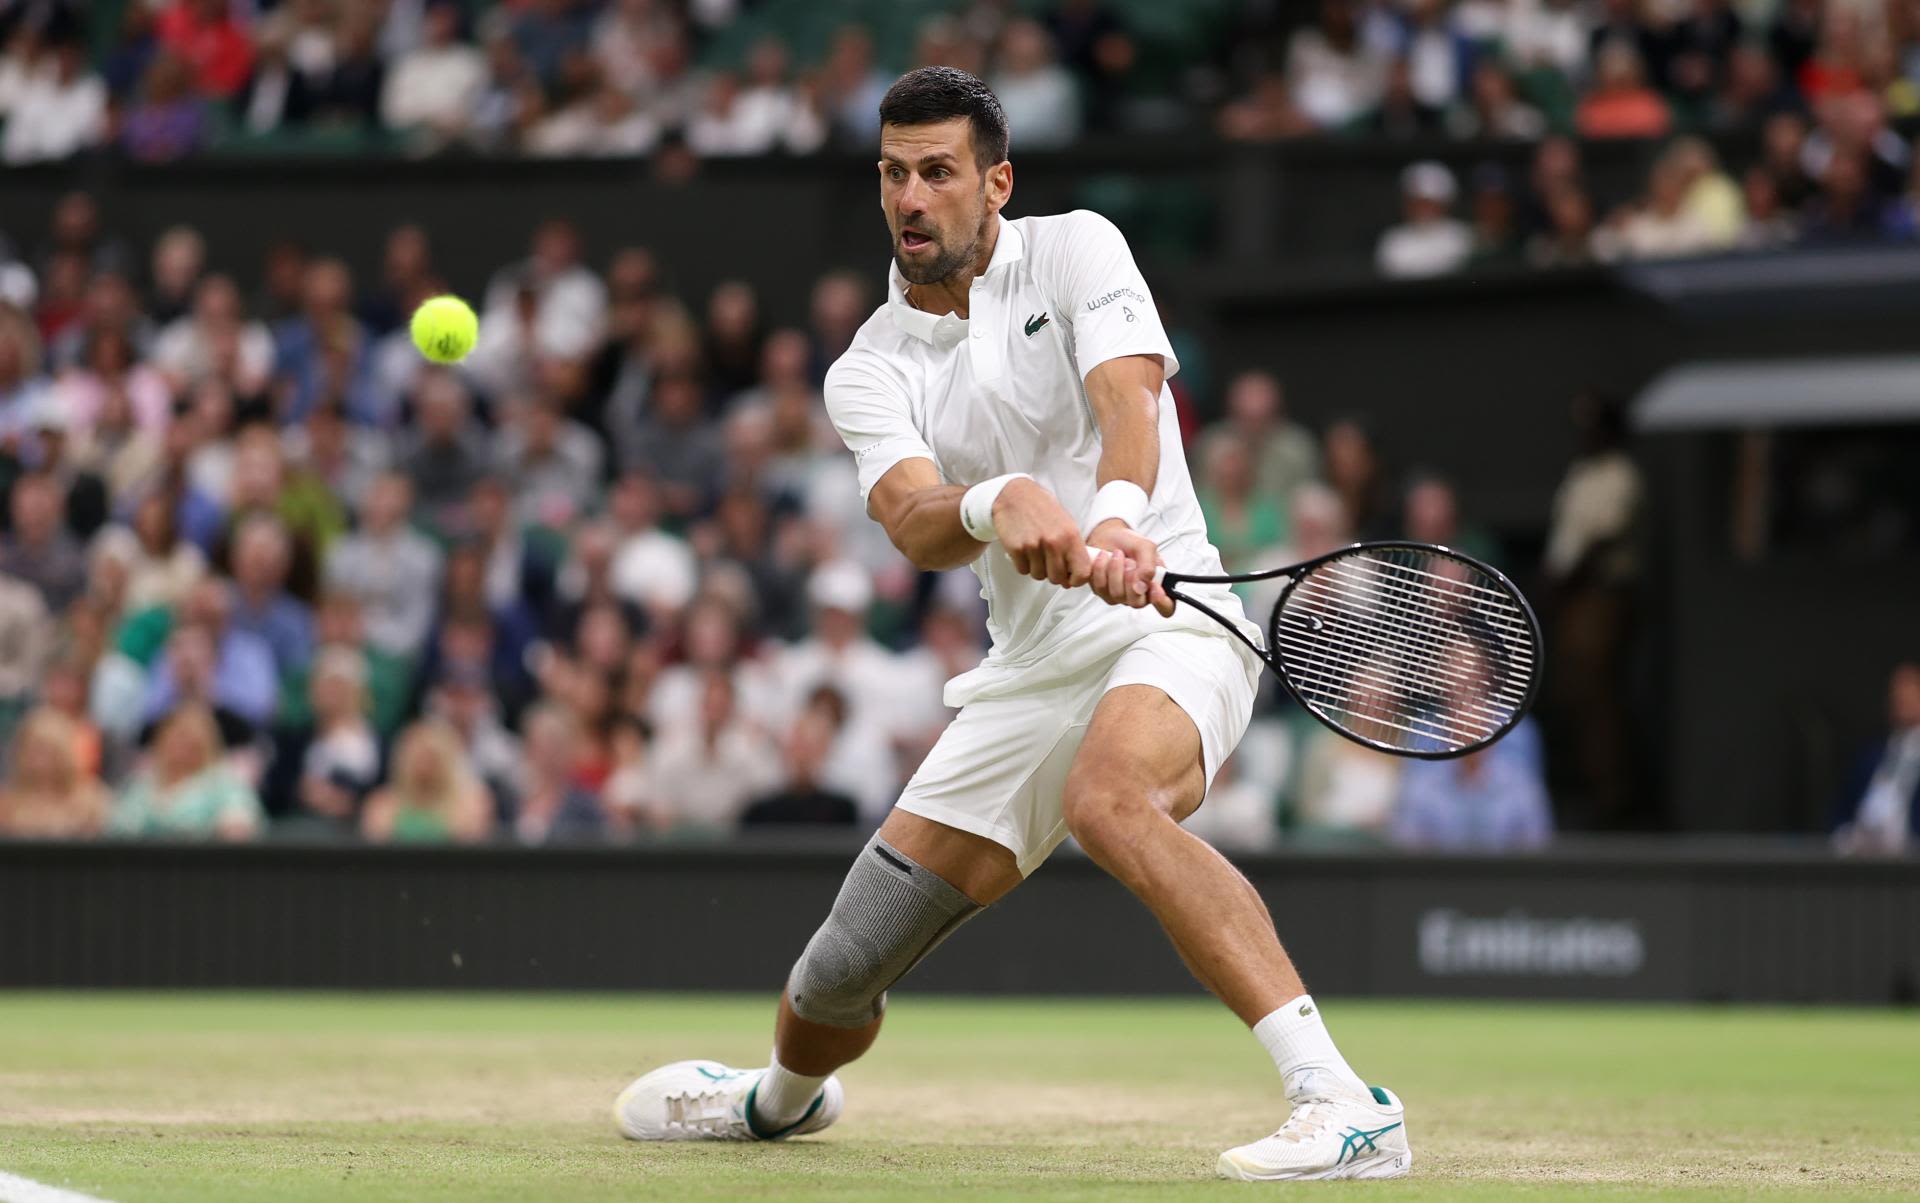 JUST IN: Novak Djokovic shares huge news about his knee just before Wimbledon SF